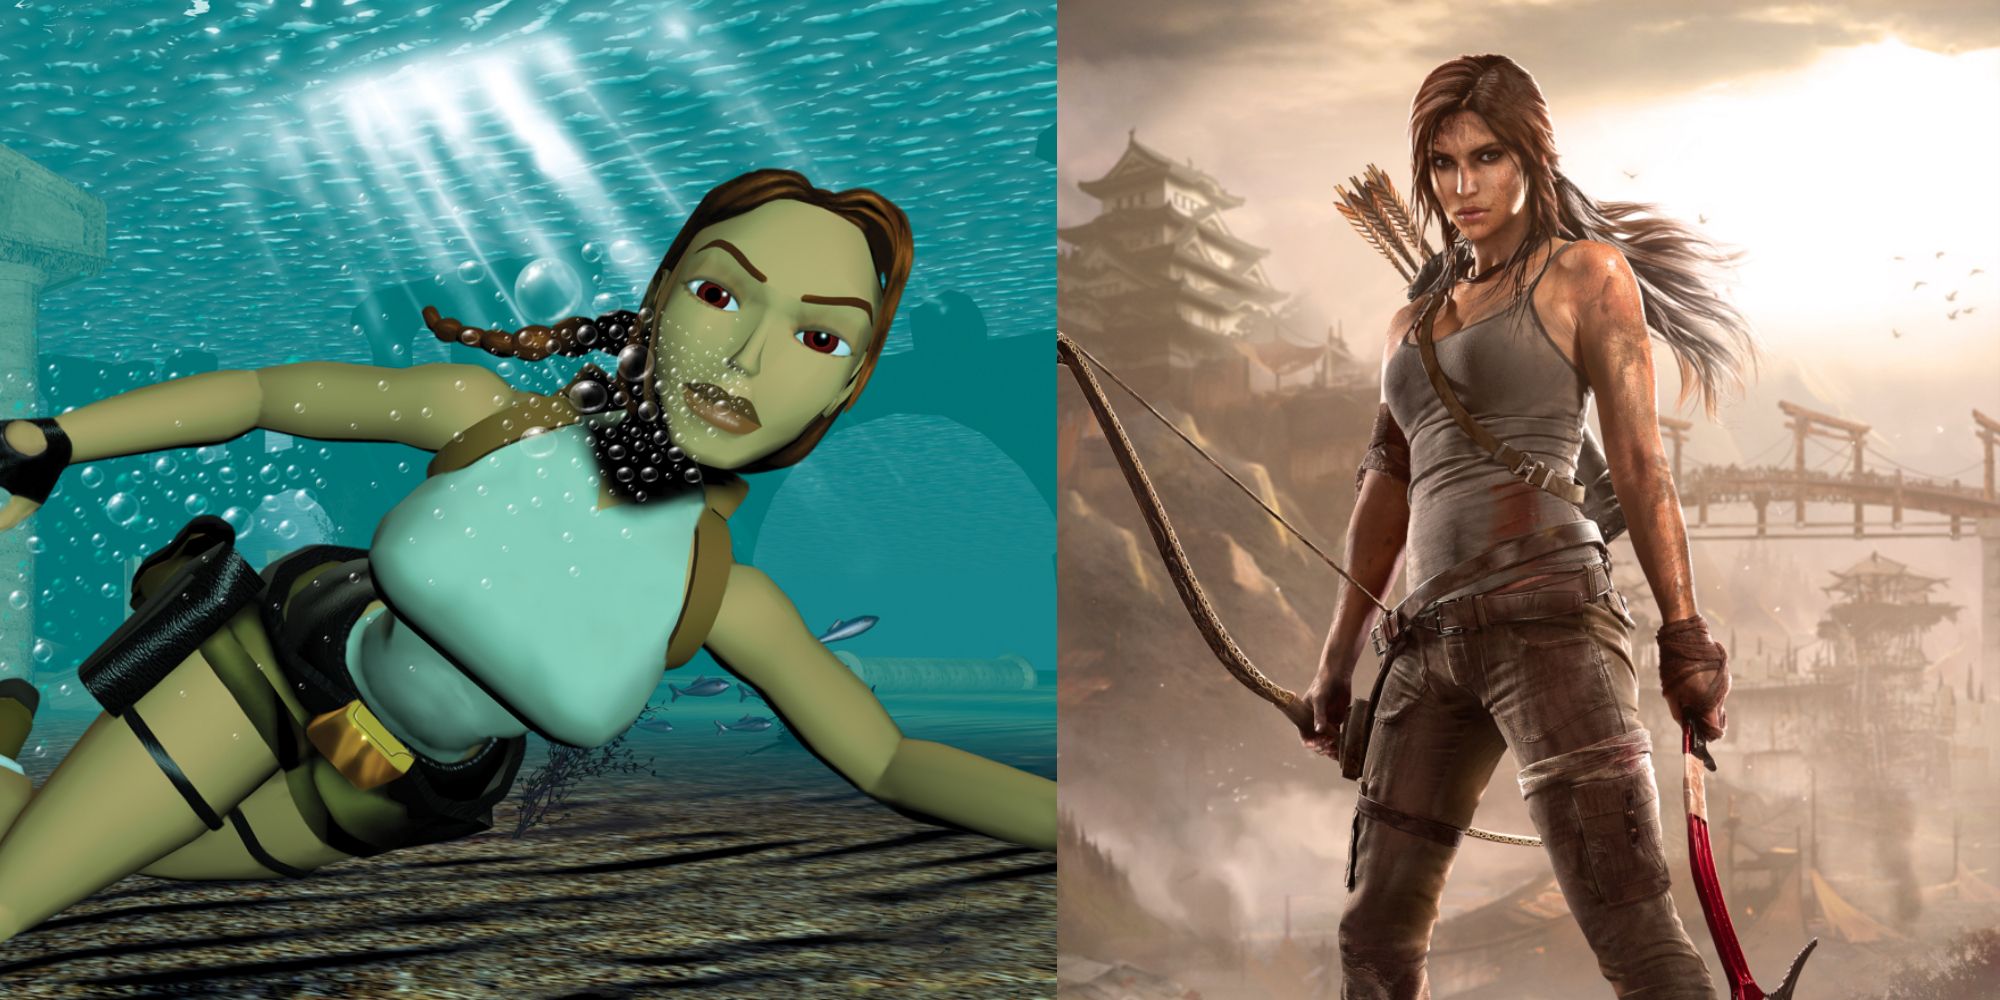 A comparison between Lara Croft's design in the first Tomb Raider and her appearance in the 2013 Tomb Raider reboot